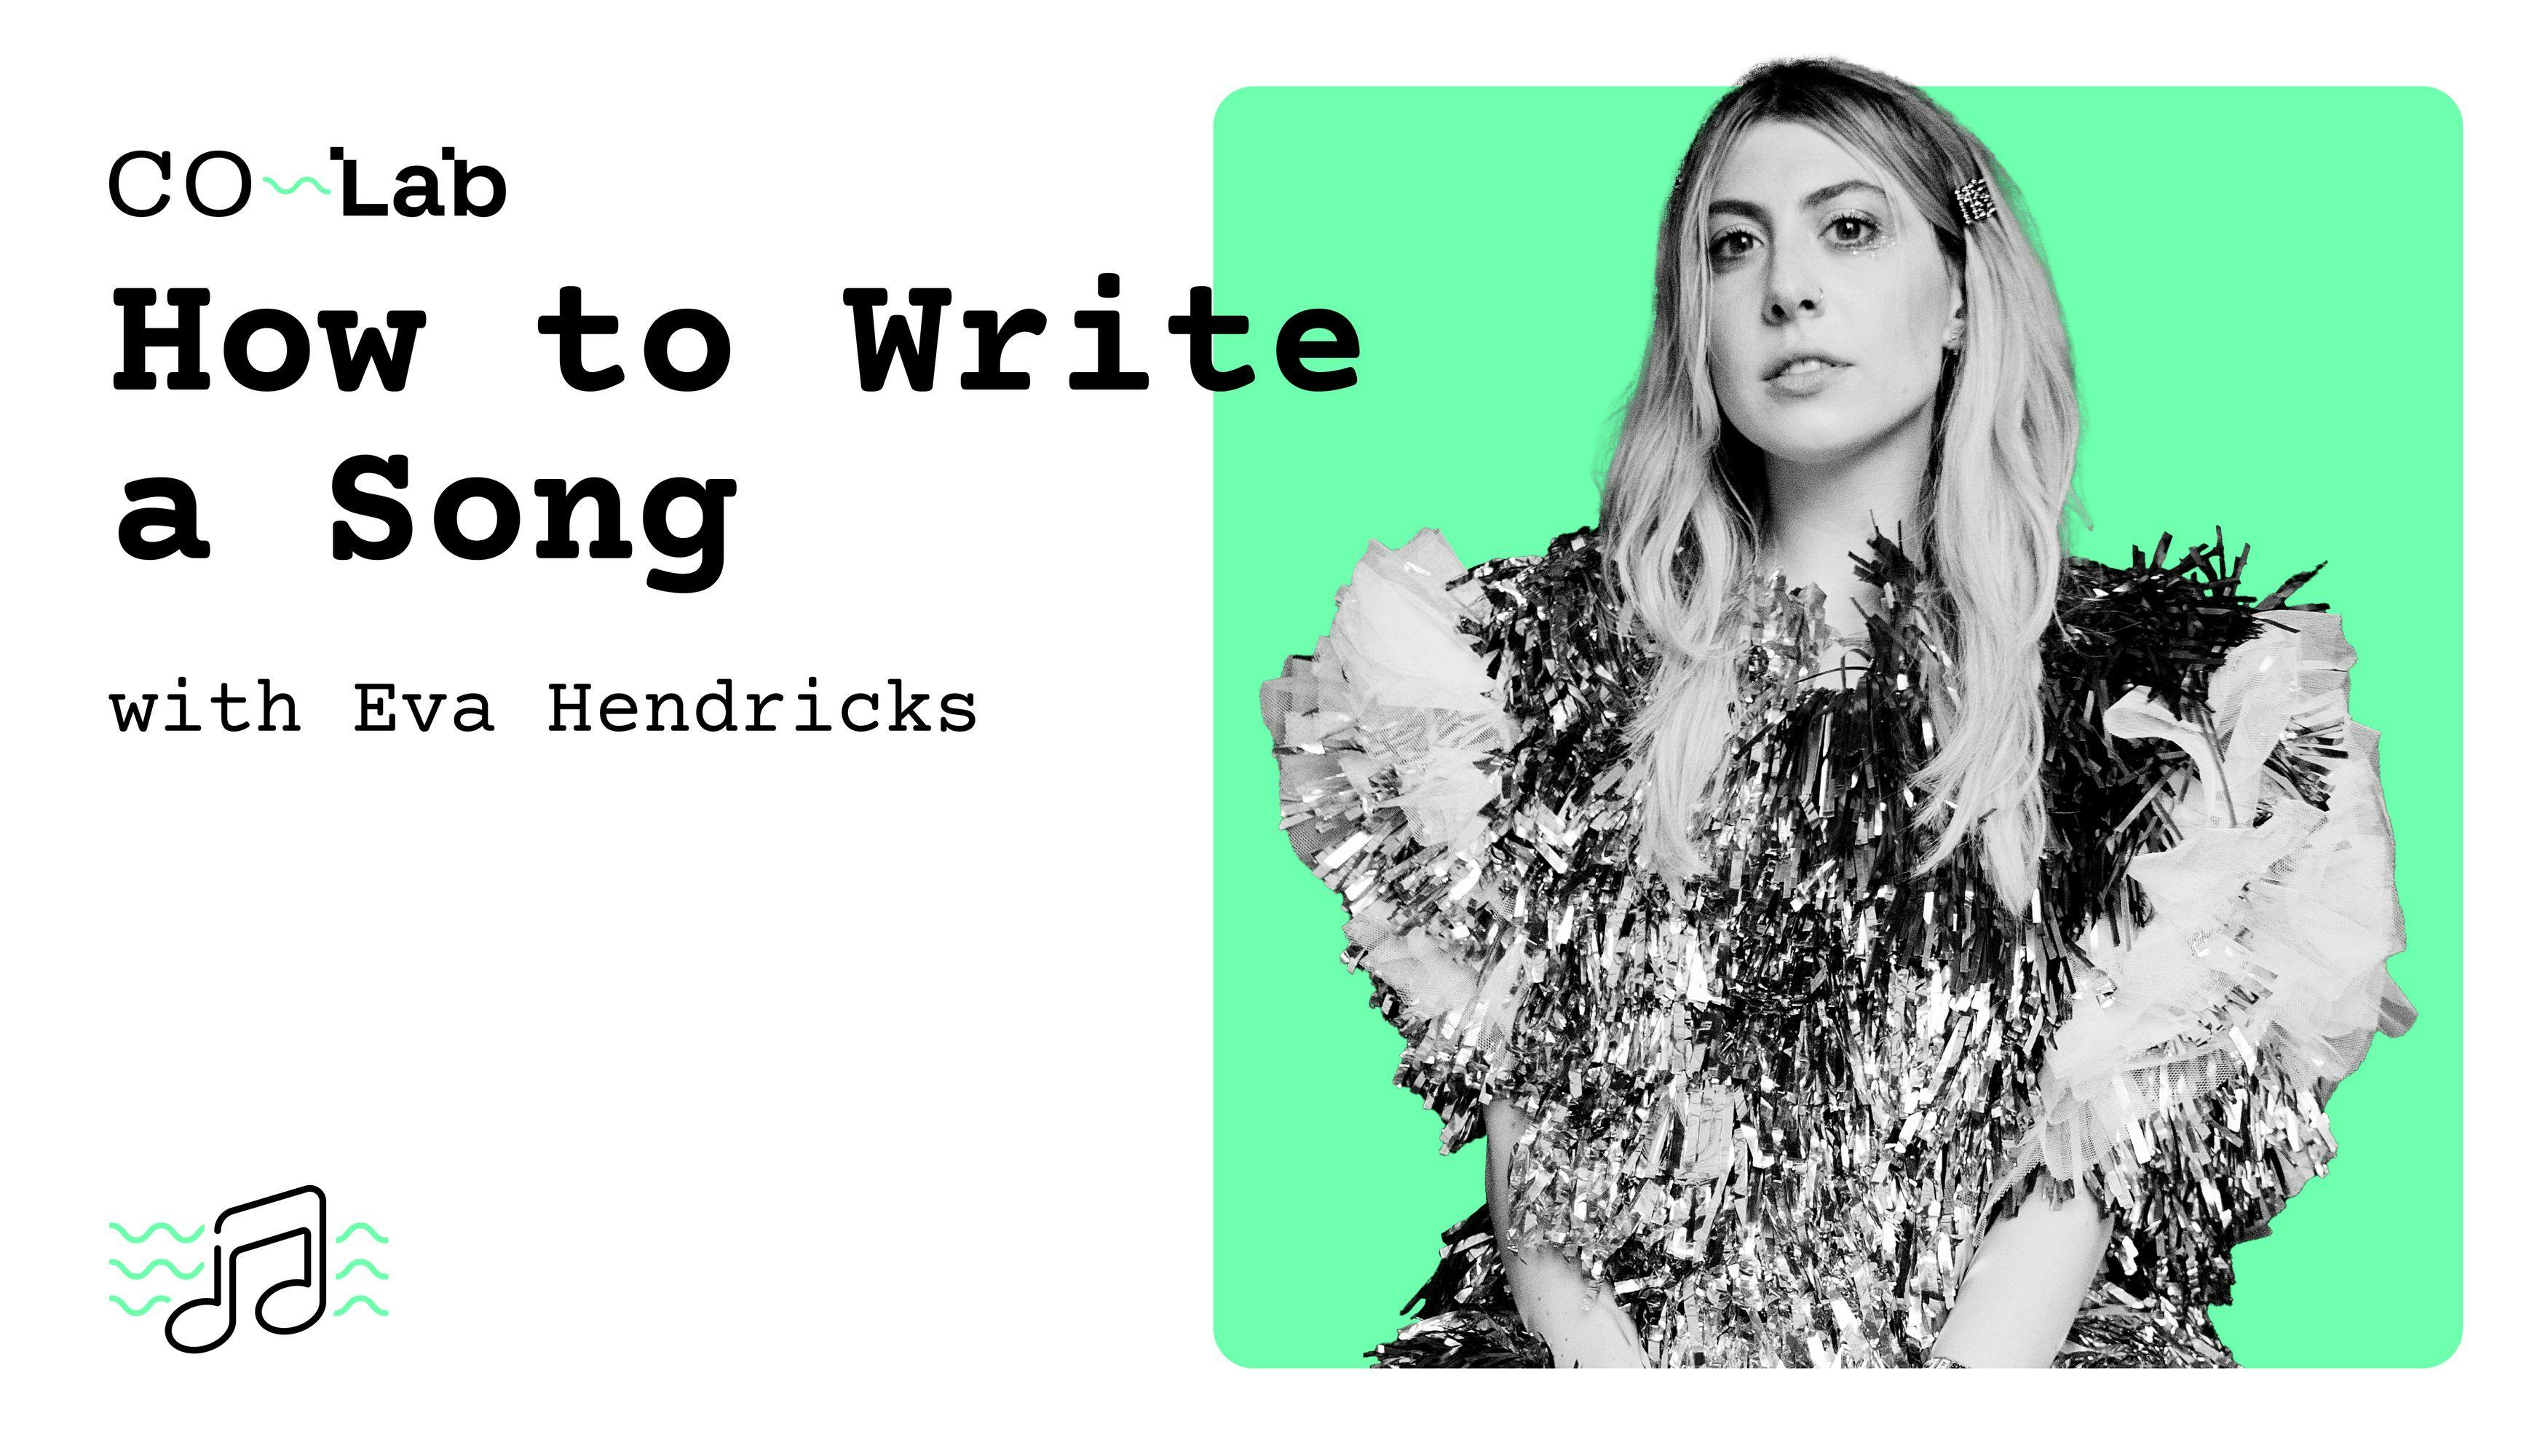 Cover image for STORYCO CO-LAB #3 - "How to Write a Song" With Singer/Songwriter Eva Hendricks of Charly Bliss